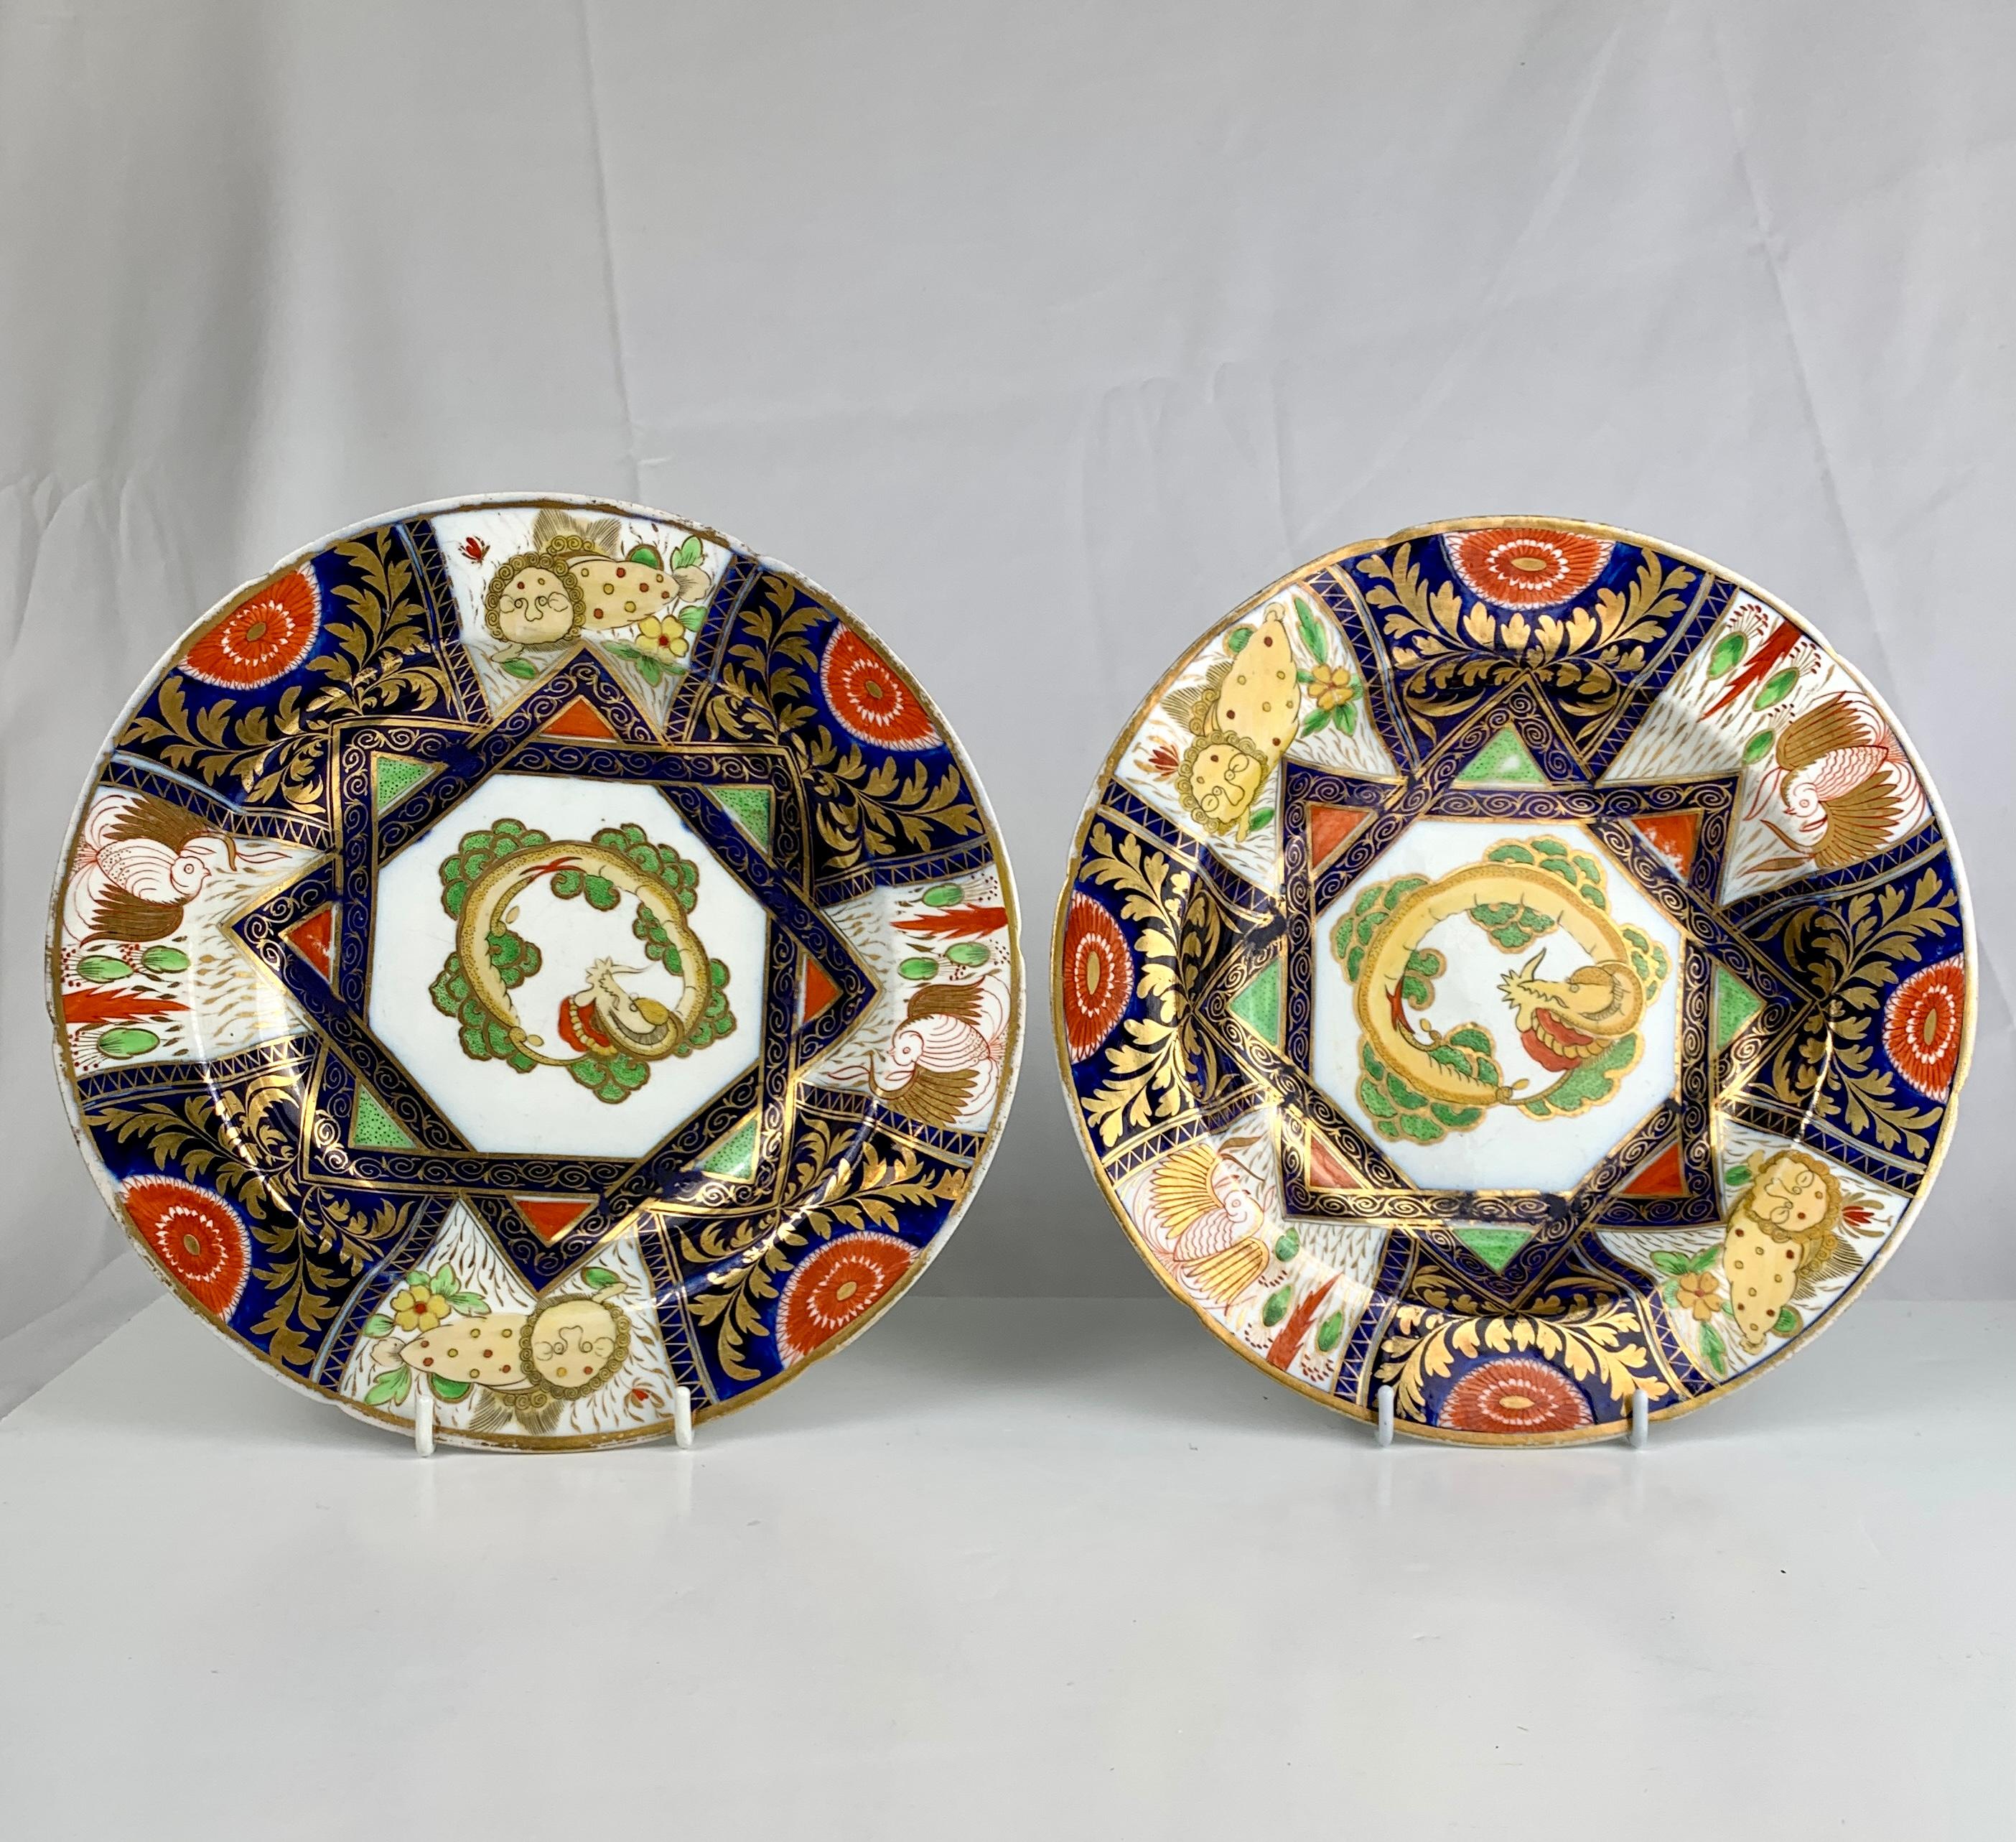 This pair of fabulous dishes are hand-painted in bold Imari colors of deep cobalt blue, rich iron red, and gold with highlights of green and yellow. 
Spode made them in England circa 1820.
The design is outstanding! 
At the center, we see a